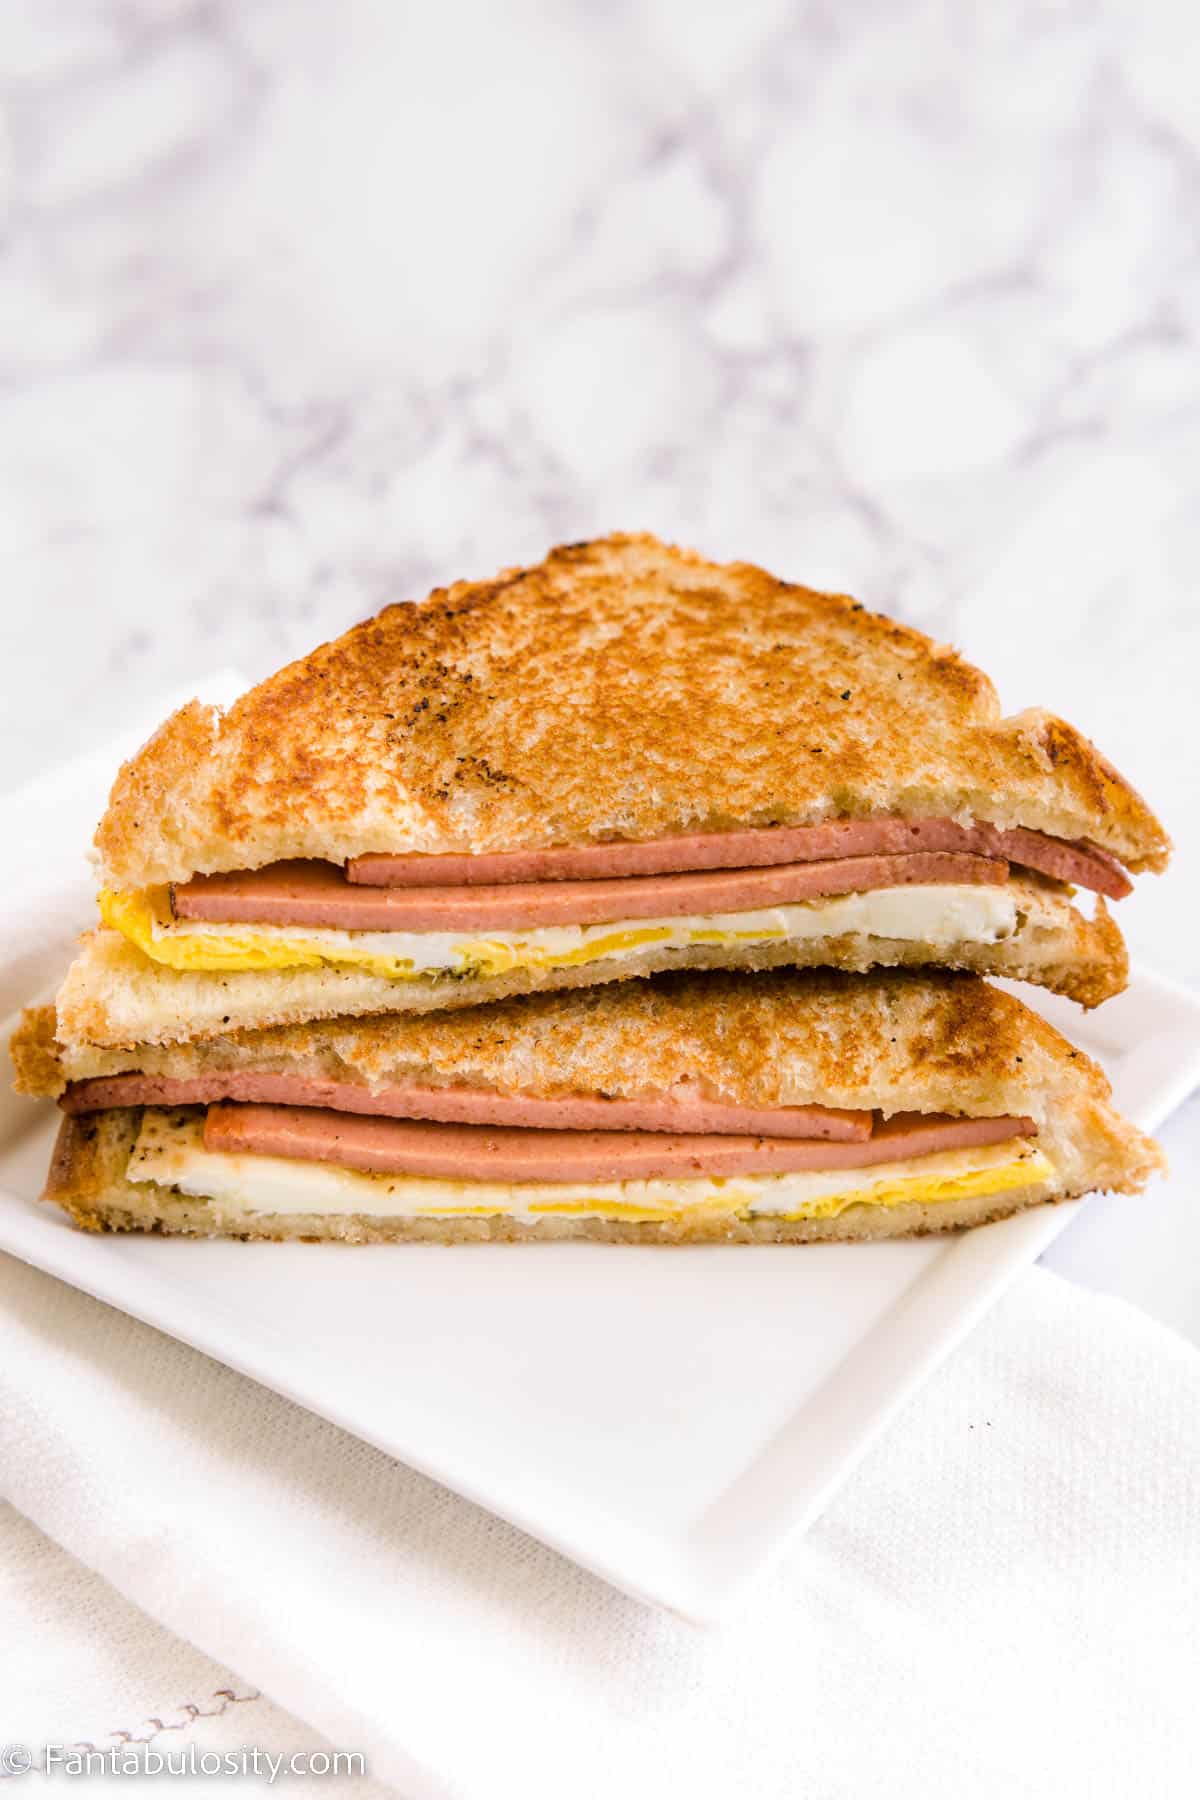 Fried bologna and egg sandwich cut in half on white plate